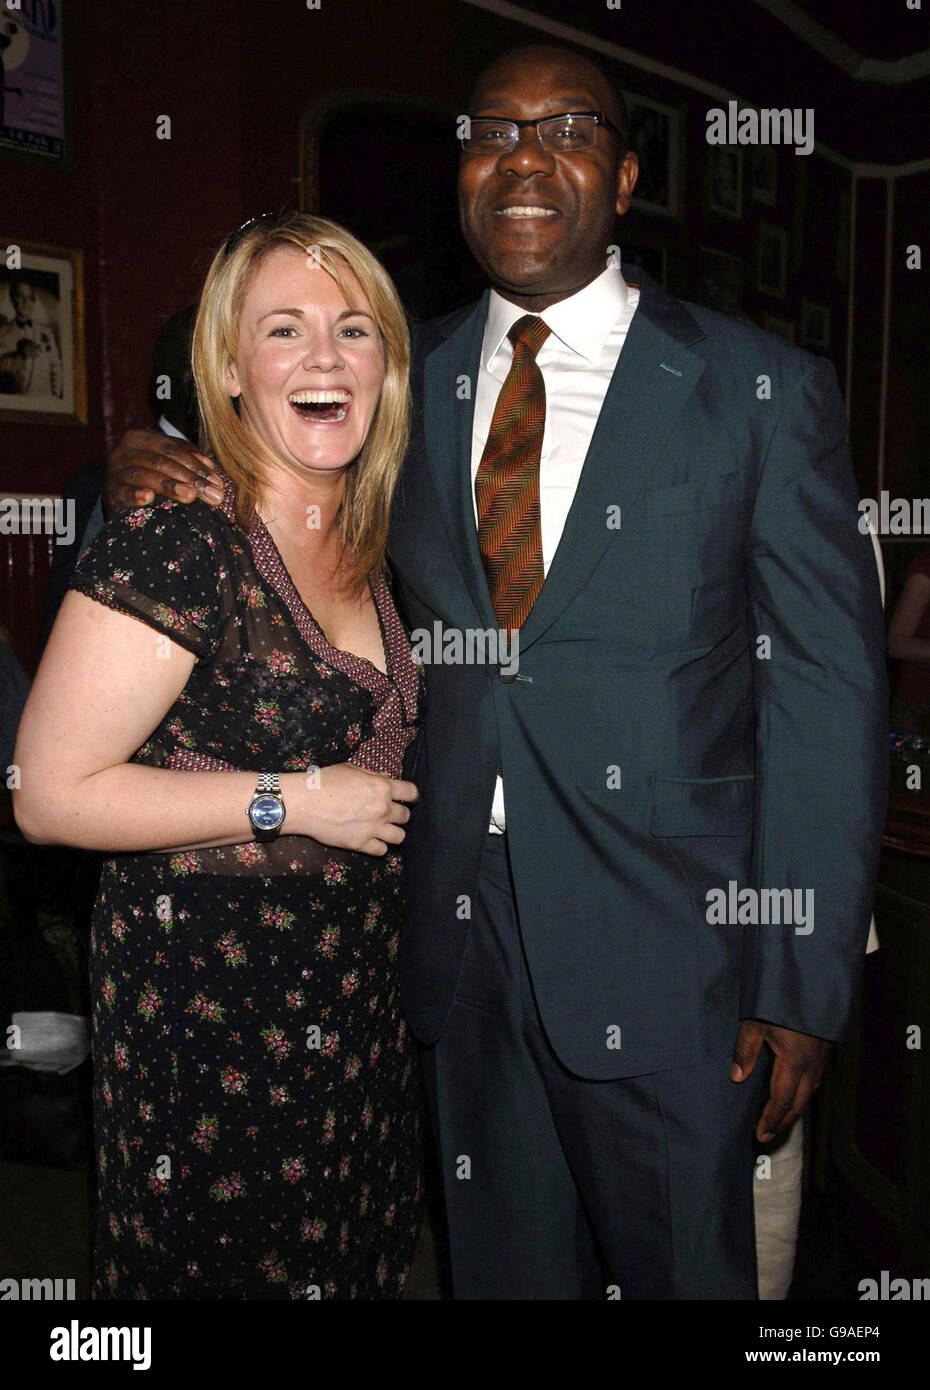 Sally Lindsay and Lenny Henry arrive for the first night of the play 'Road To Nirvana', at The King's Head theatre in Islington, north London. Stock Photo